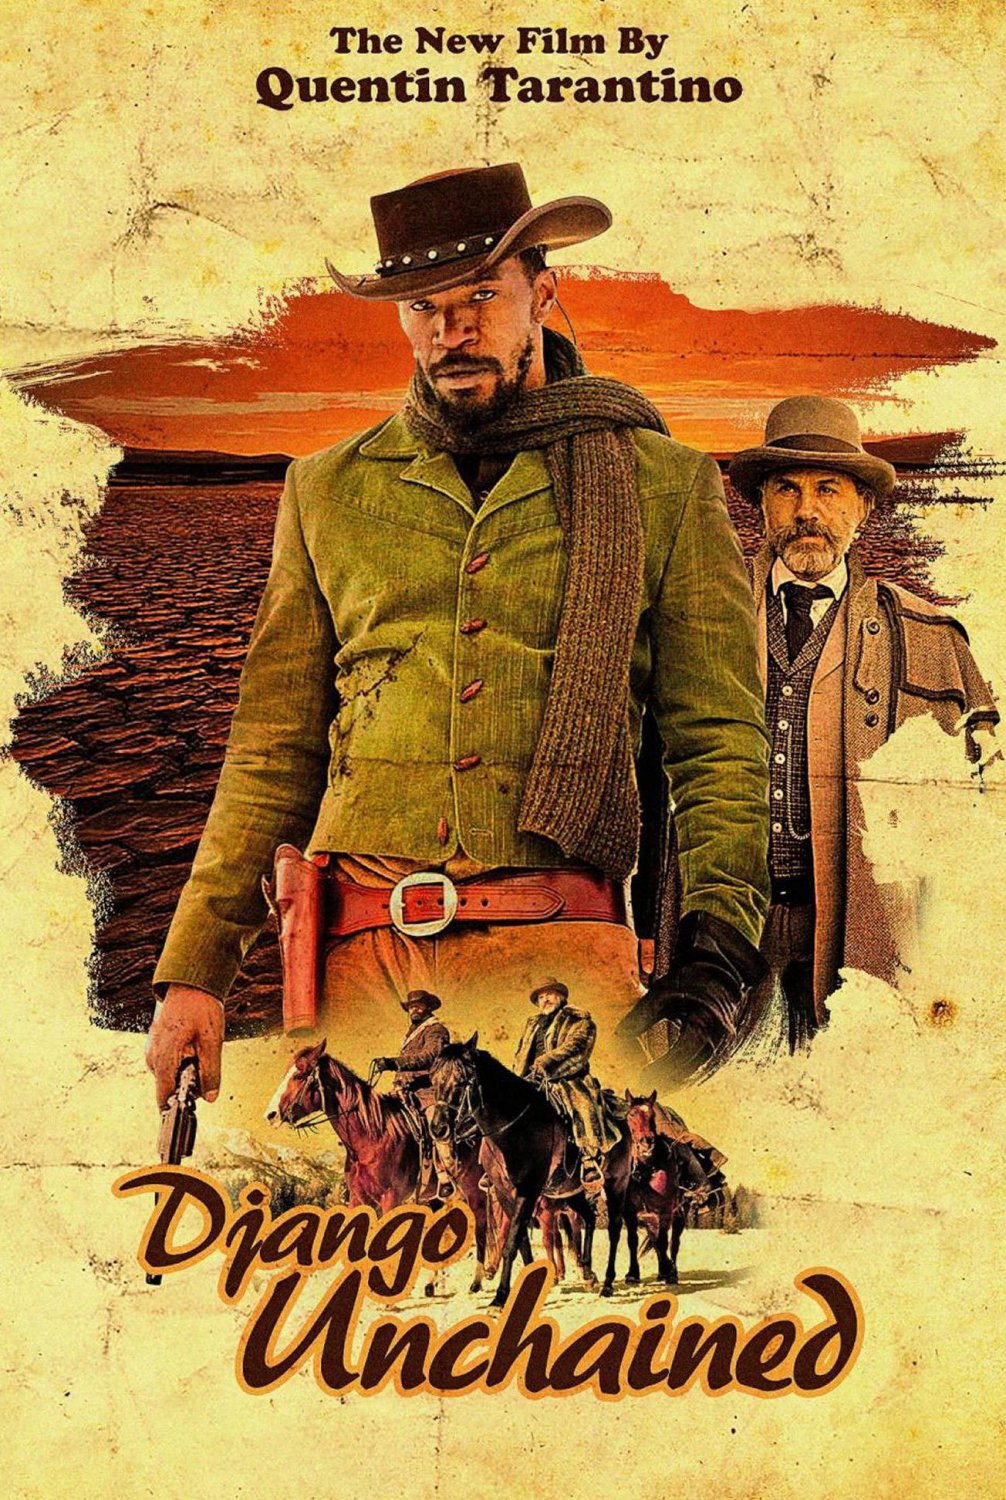 Django Unchained Movie Poster 13x19 inches